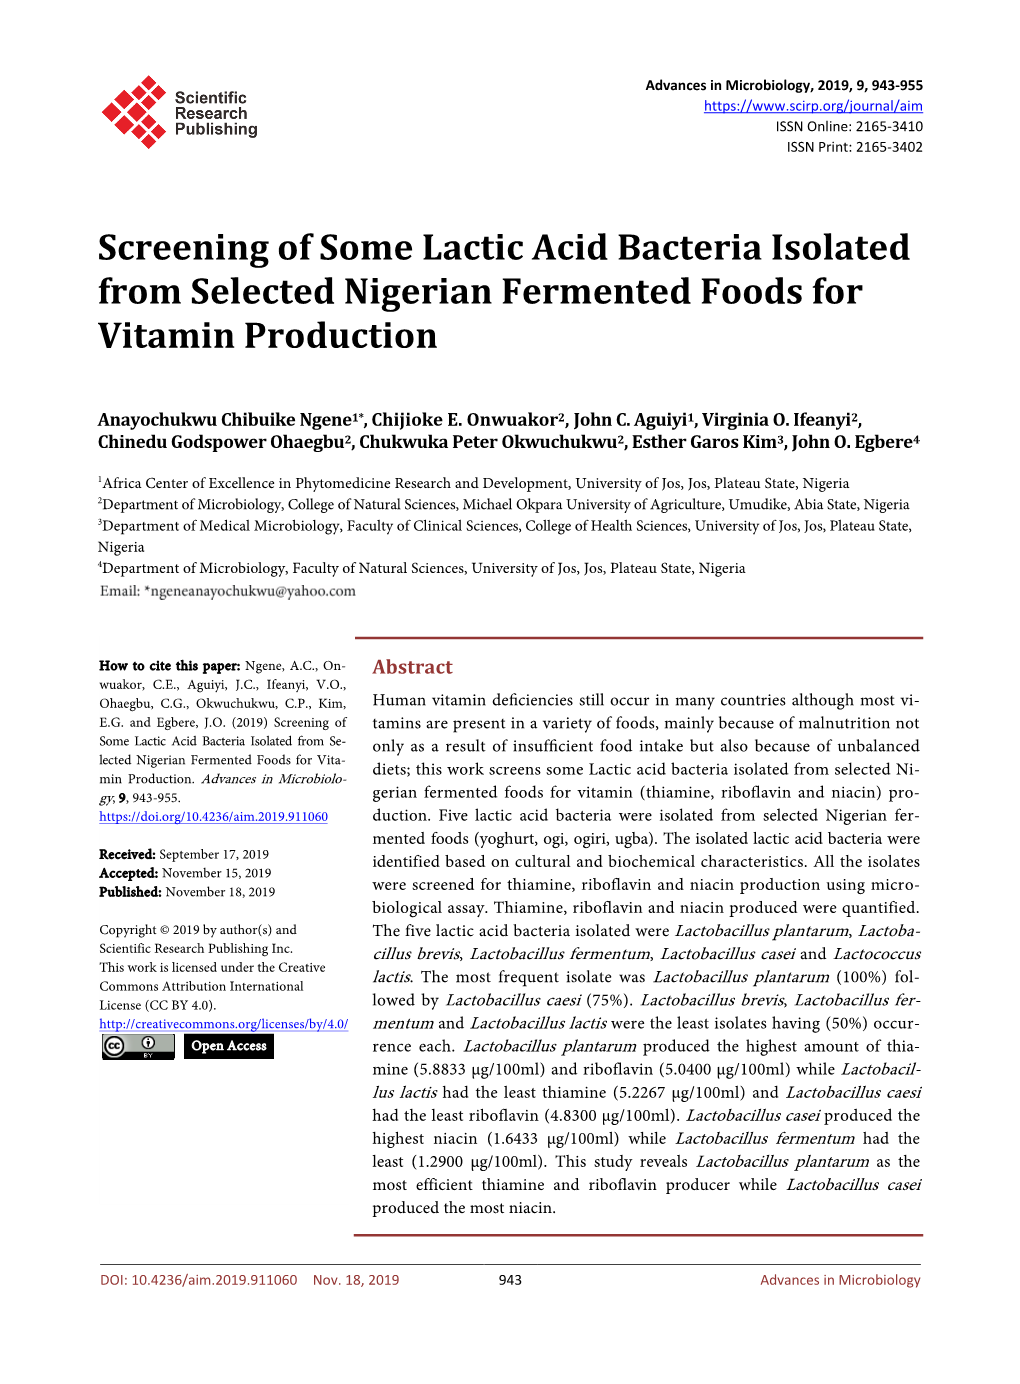 Screening of Some Lactic Acid Bacteria Isolated from Selected Nigerian Fermented Foods for Vitamin Production